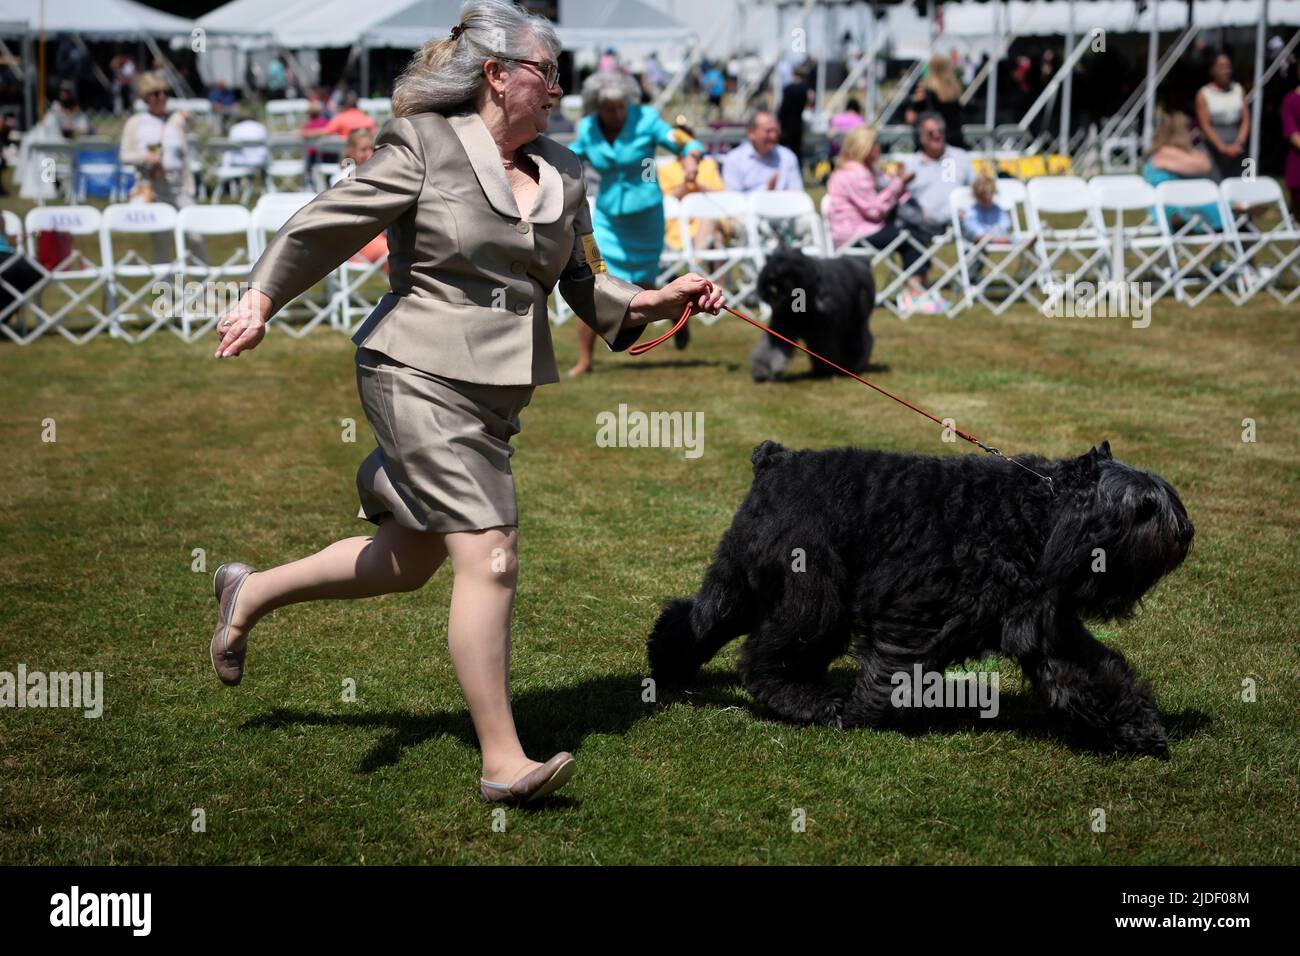 A handler runs a Briard dog in the ring during breed judging at the 146th Westminster Kennel Club Dog Show at the Lyndhurst Estate in Tarrytown, New York, U.S., June 20, 2022. REUTERS/Mike Segar Stock Photo